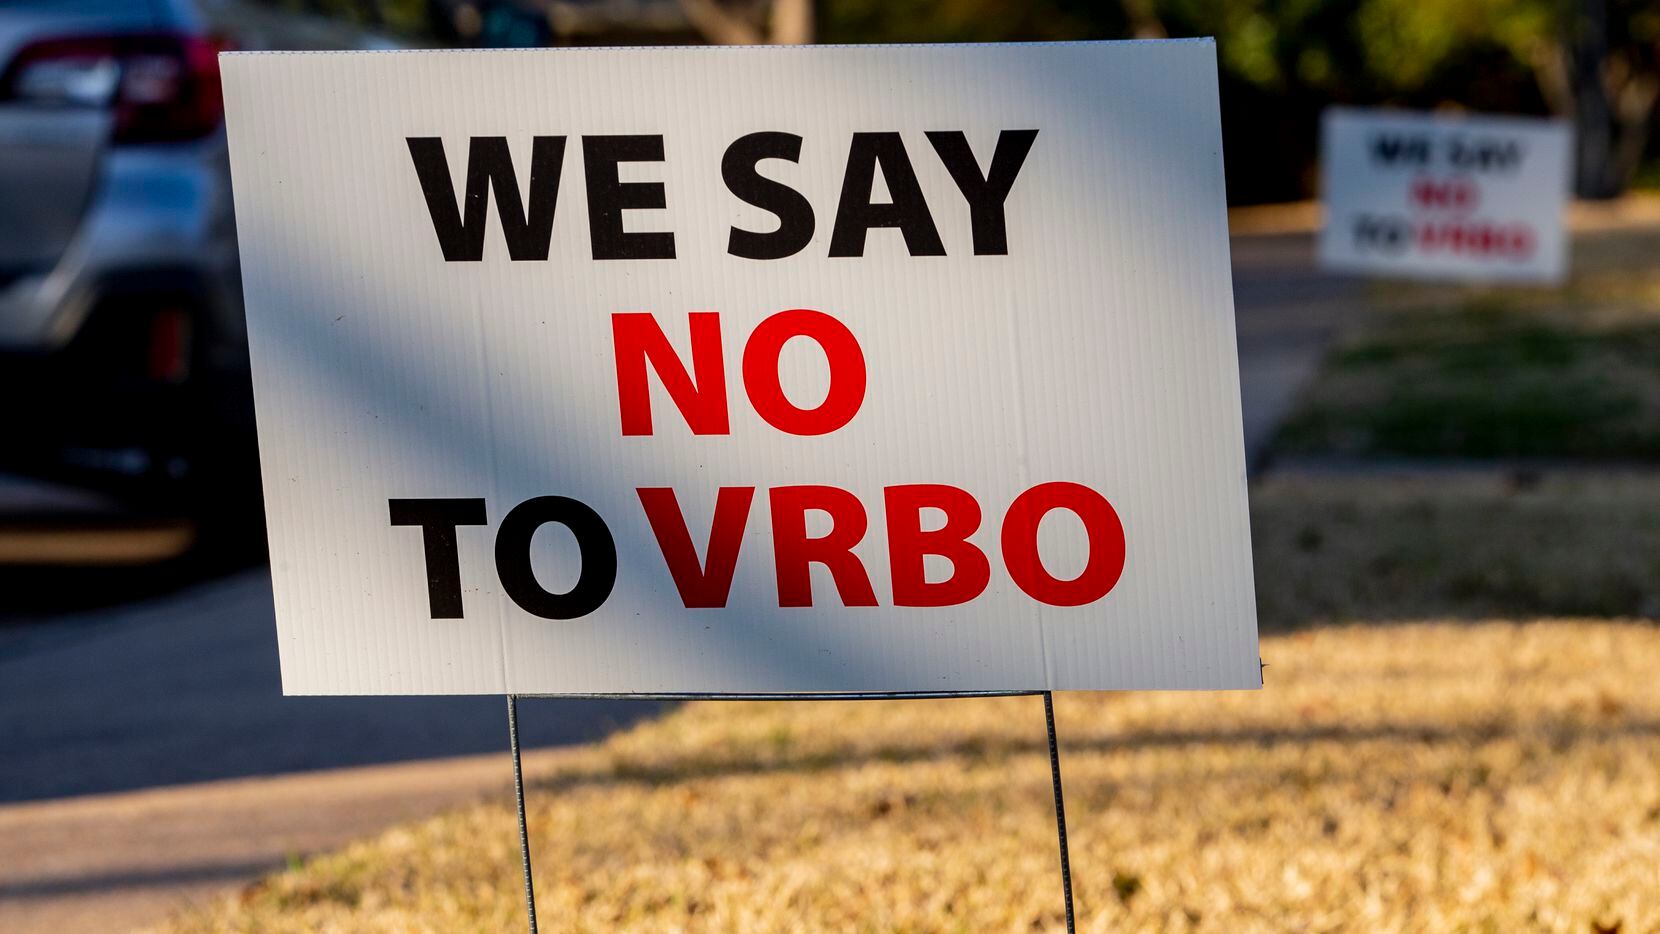 Lochwood neighbors began mobilizing in September against a new short-term rental that advertised capacity up to 22 people. Thursday, four months after  “We say no to VRBO” signs began showing up in yards, the property was removed from the Airbnb and VRBO platforms.